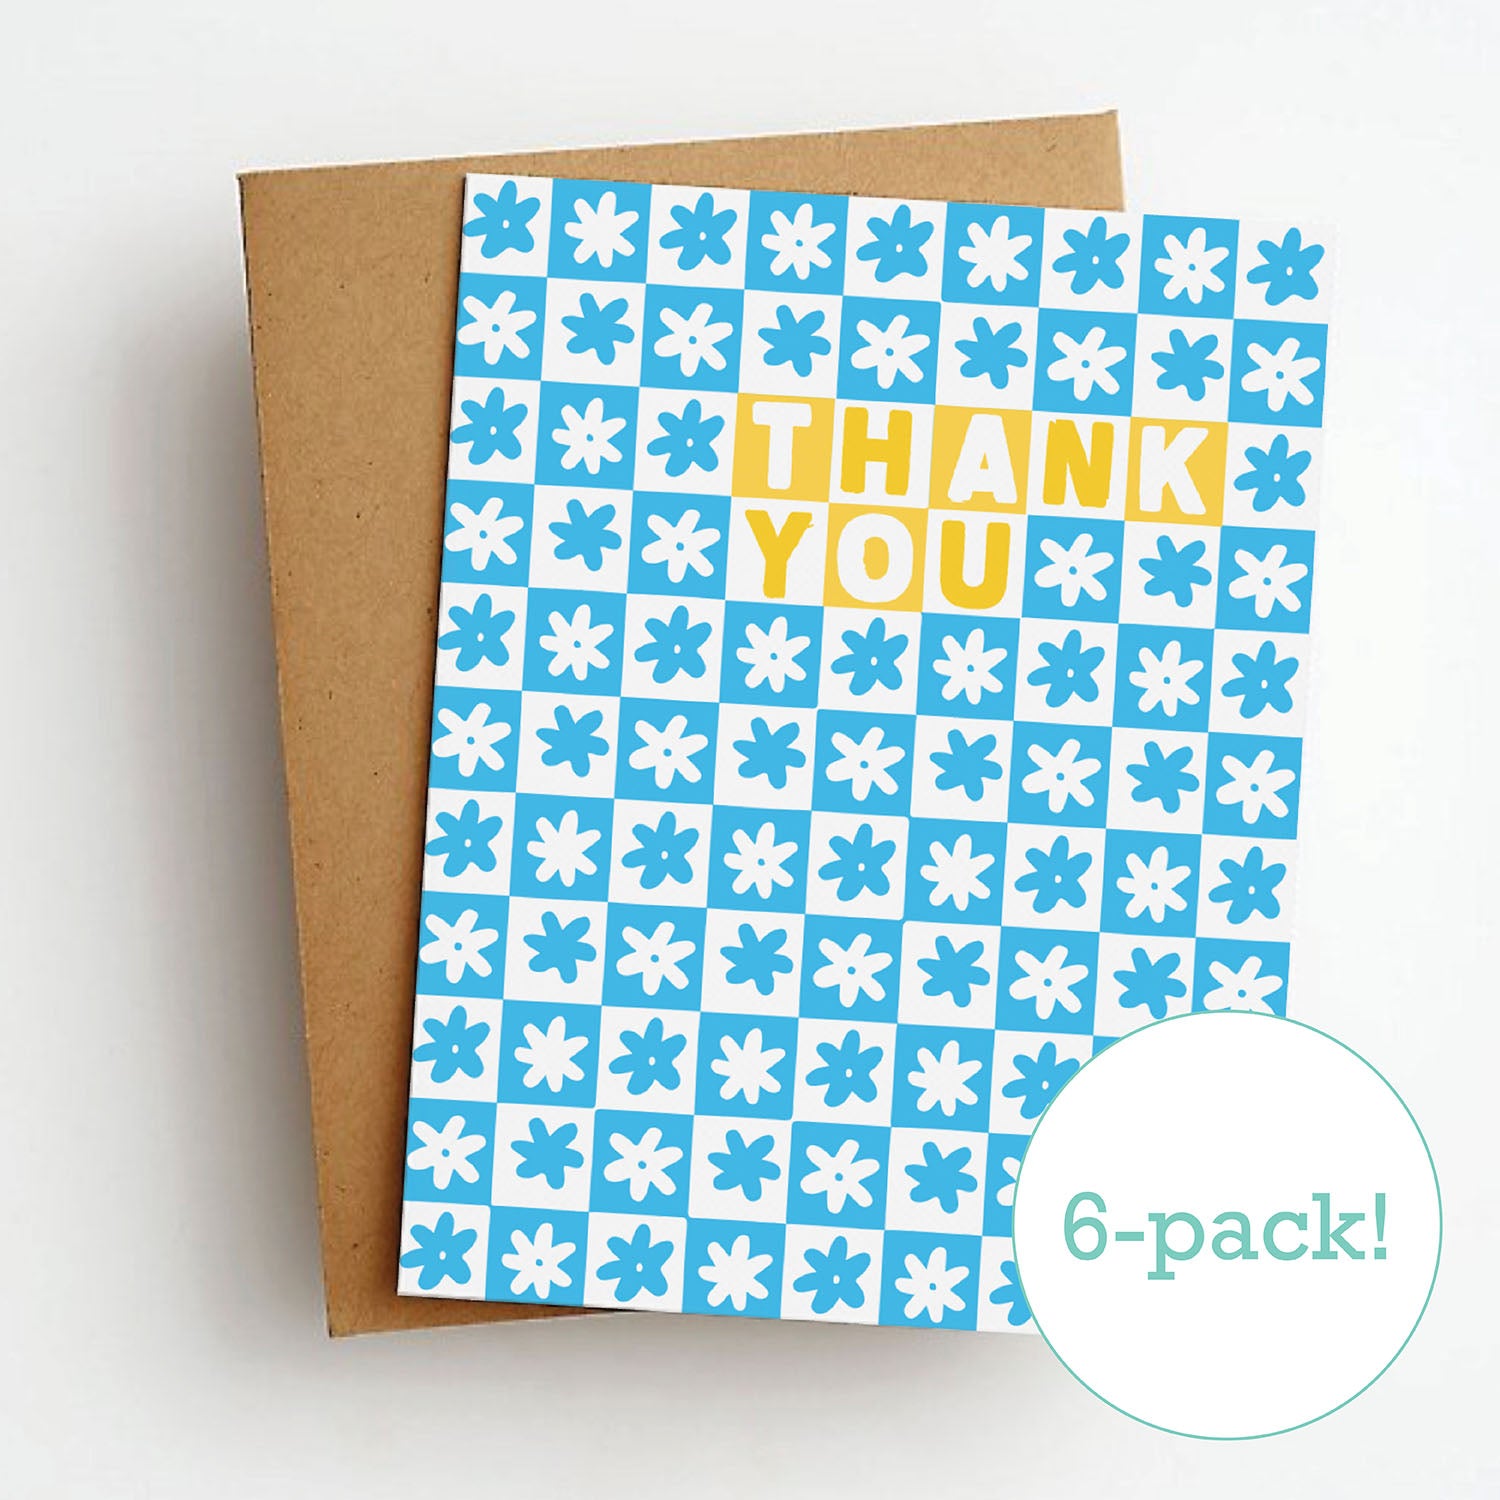 checkered flowers cards (6-pack!)